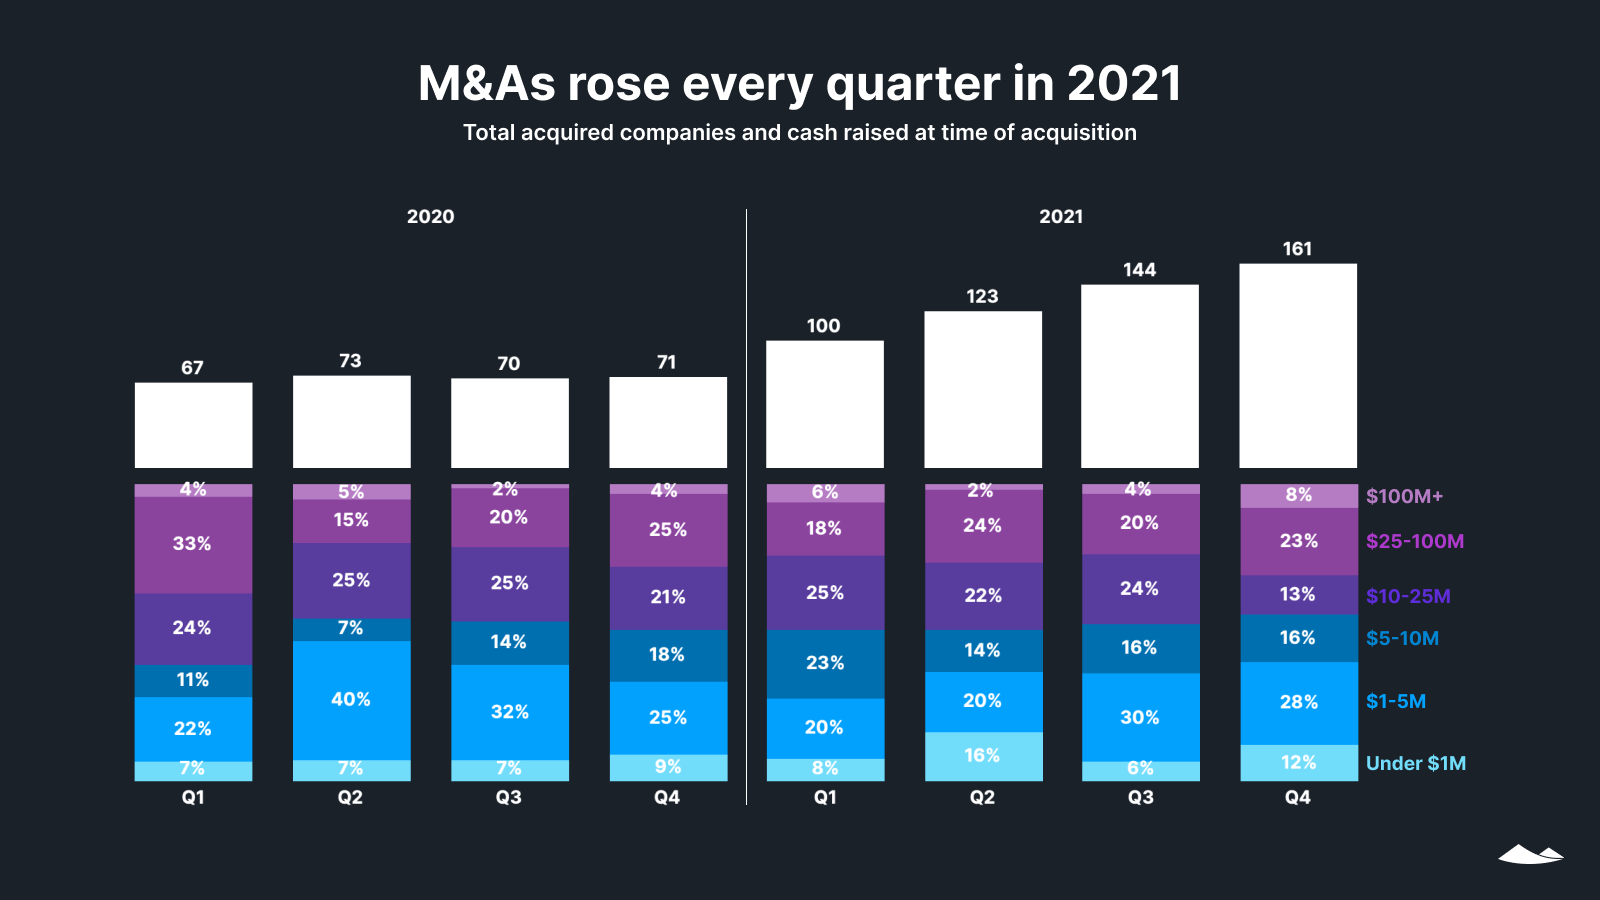 M&As rose every quarter in 2021: Total acquired companies and cash raised at time of acquisition by quarter, 2020-21